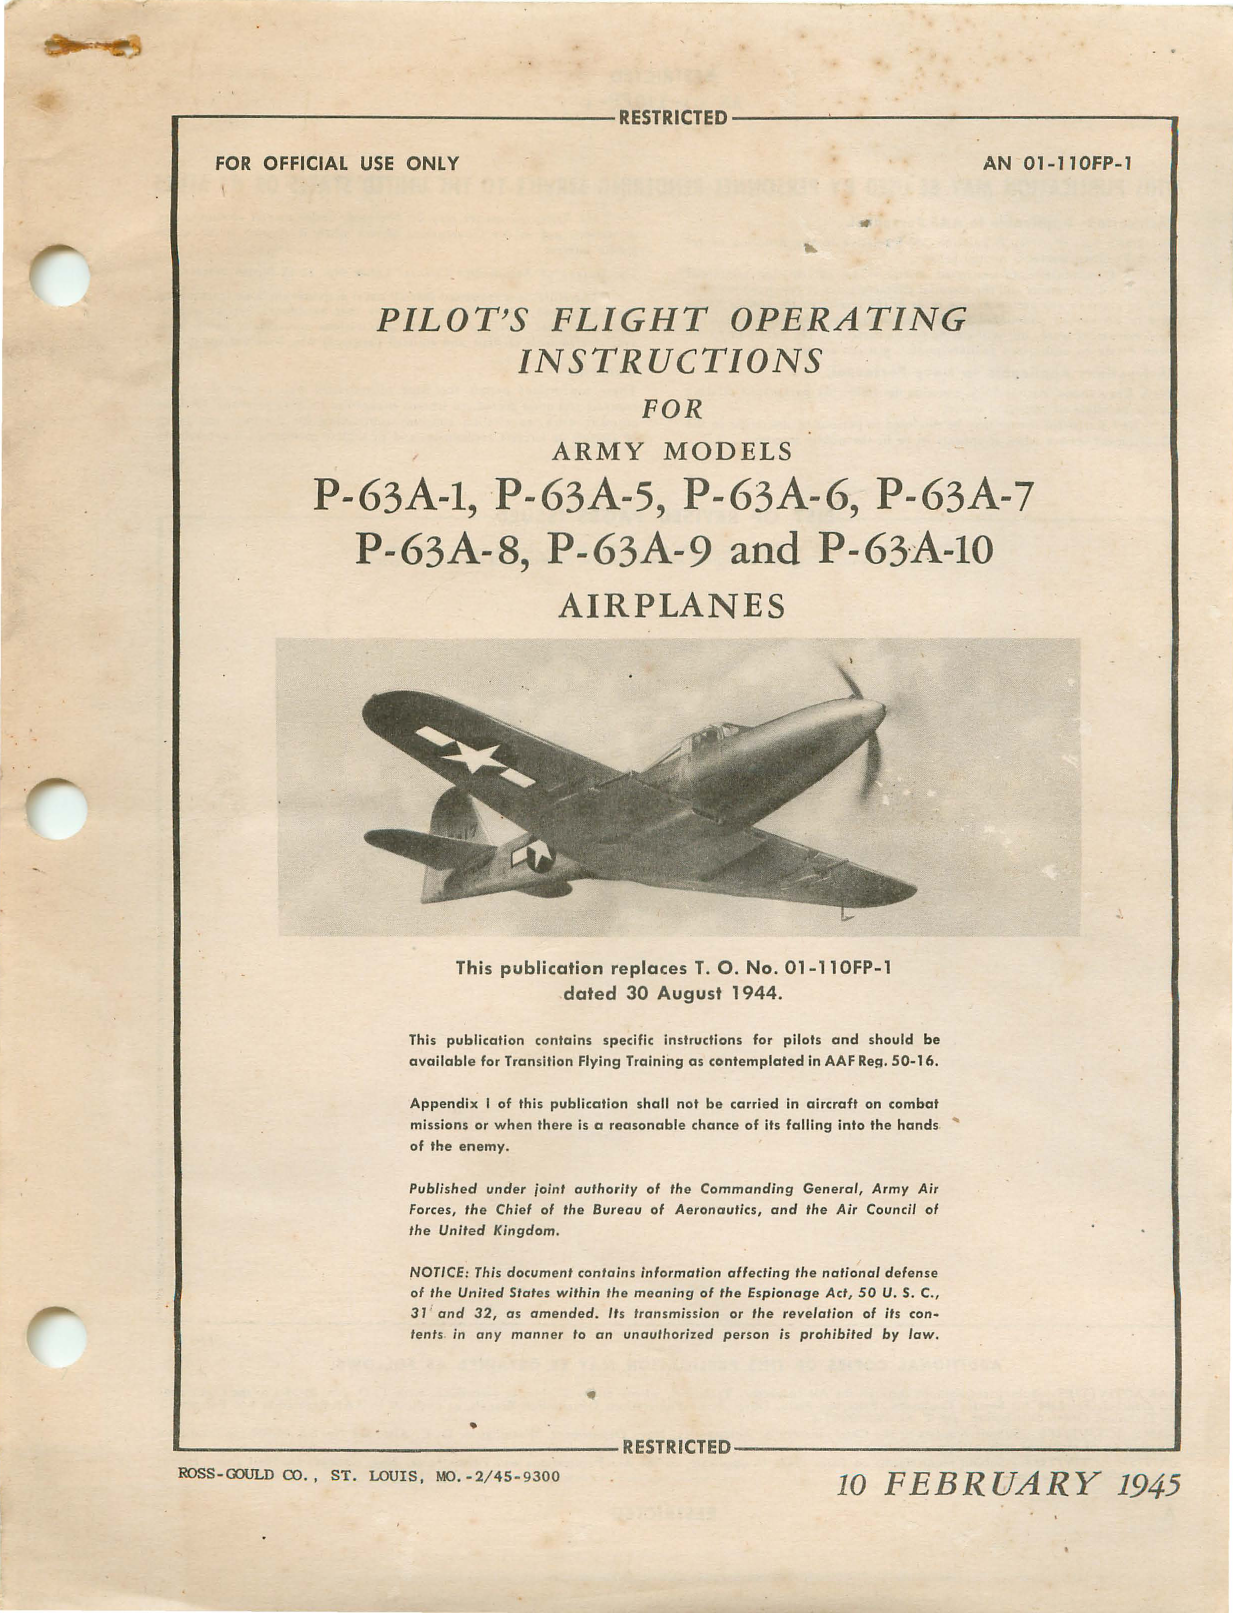 Sample page 1 from AirCorps Library document: Pilot's Flight Operating Instructions for P-63A-1, P-63A-5, P-63A-6, P-63A-7, P-63A-8, P-63A-9, P-63A-10